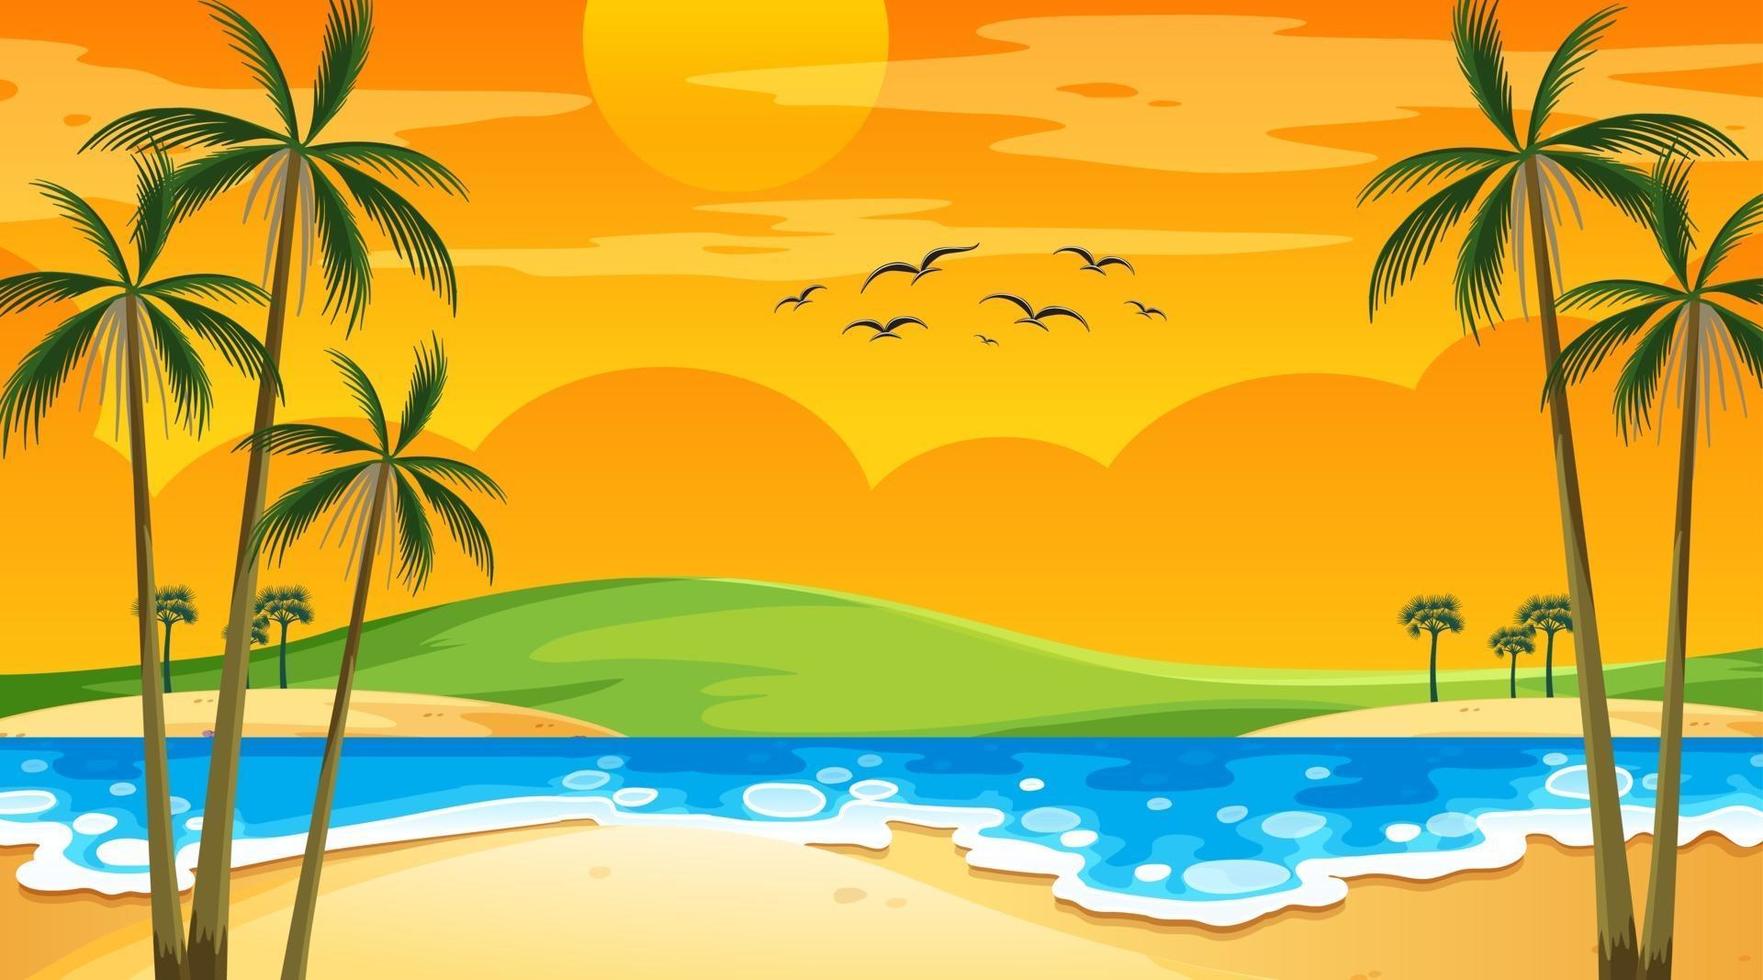 Beach at sunset time landscape scene with palm trees vector